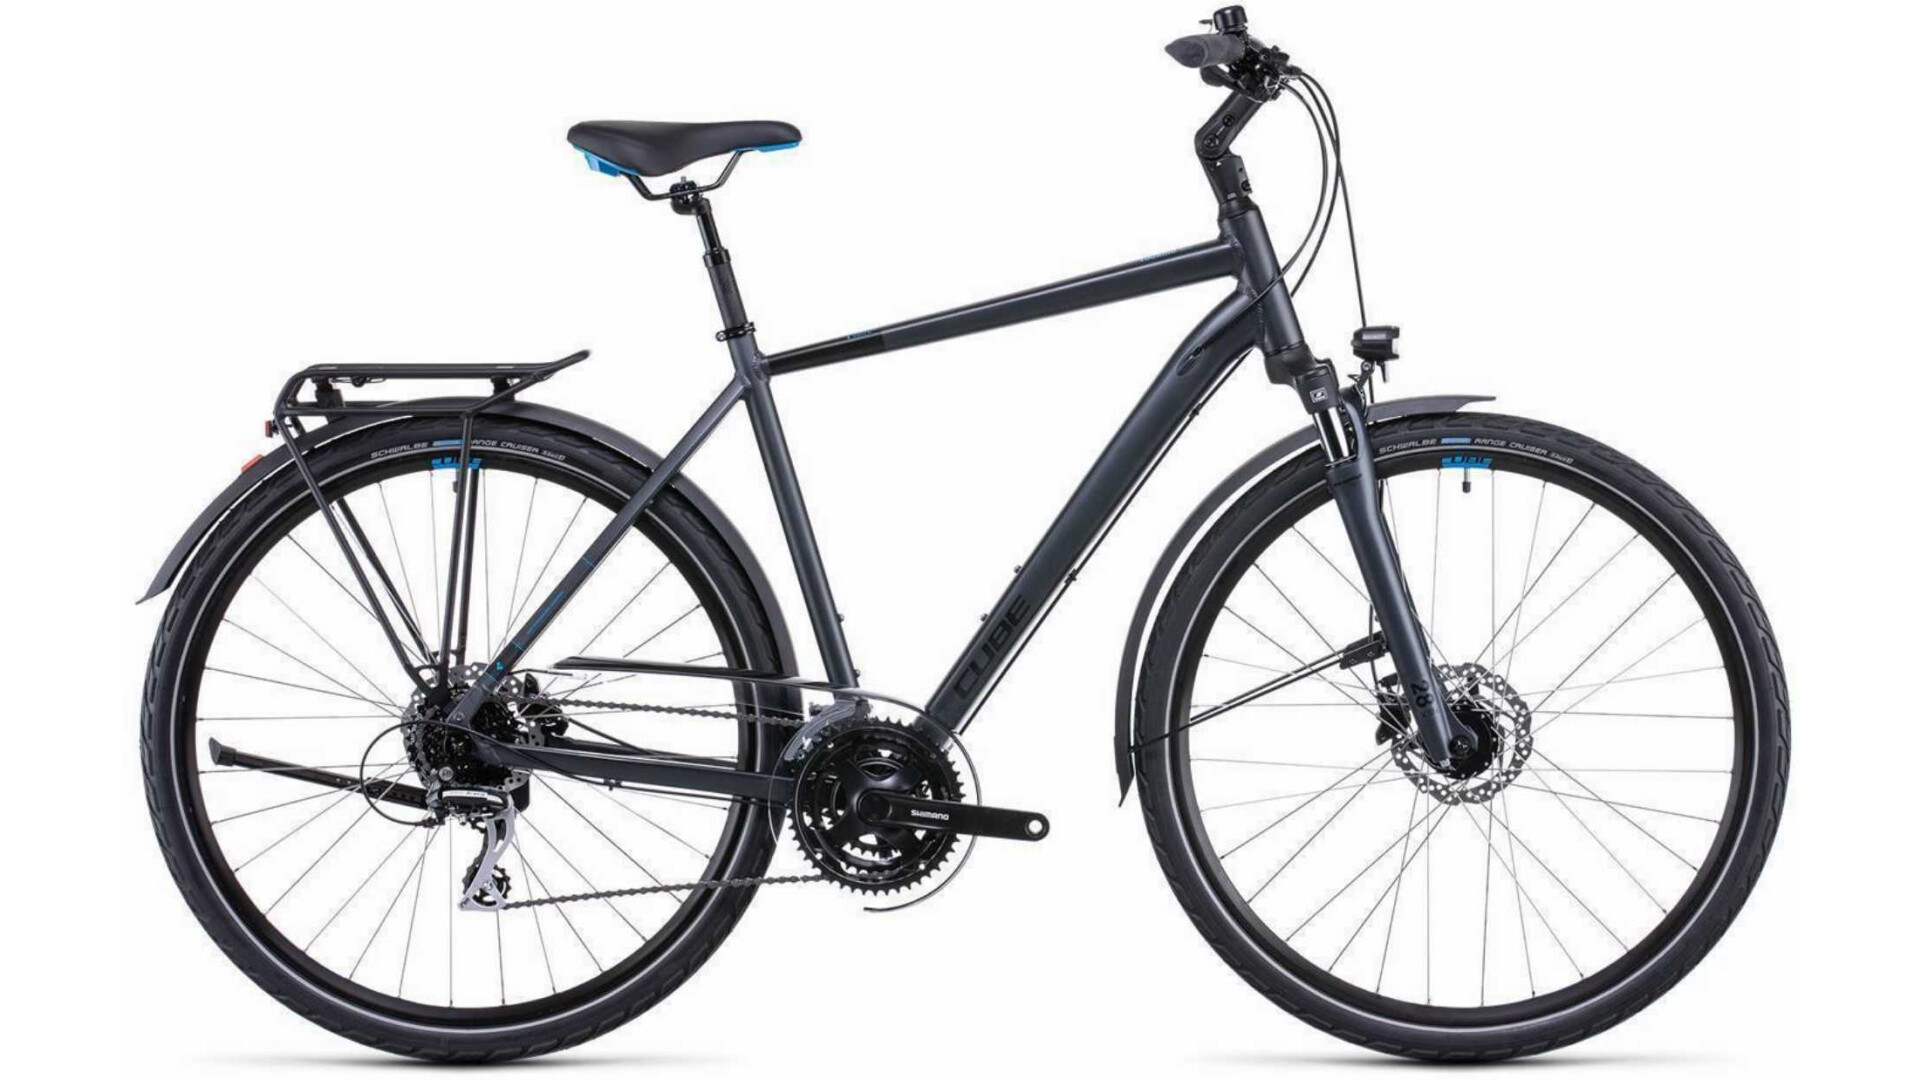 Cube Touring ONE 28 grey´n´blue